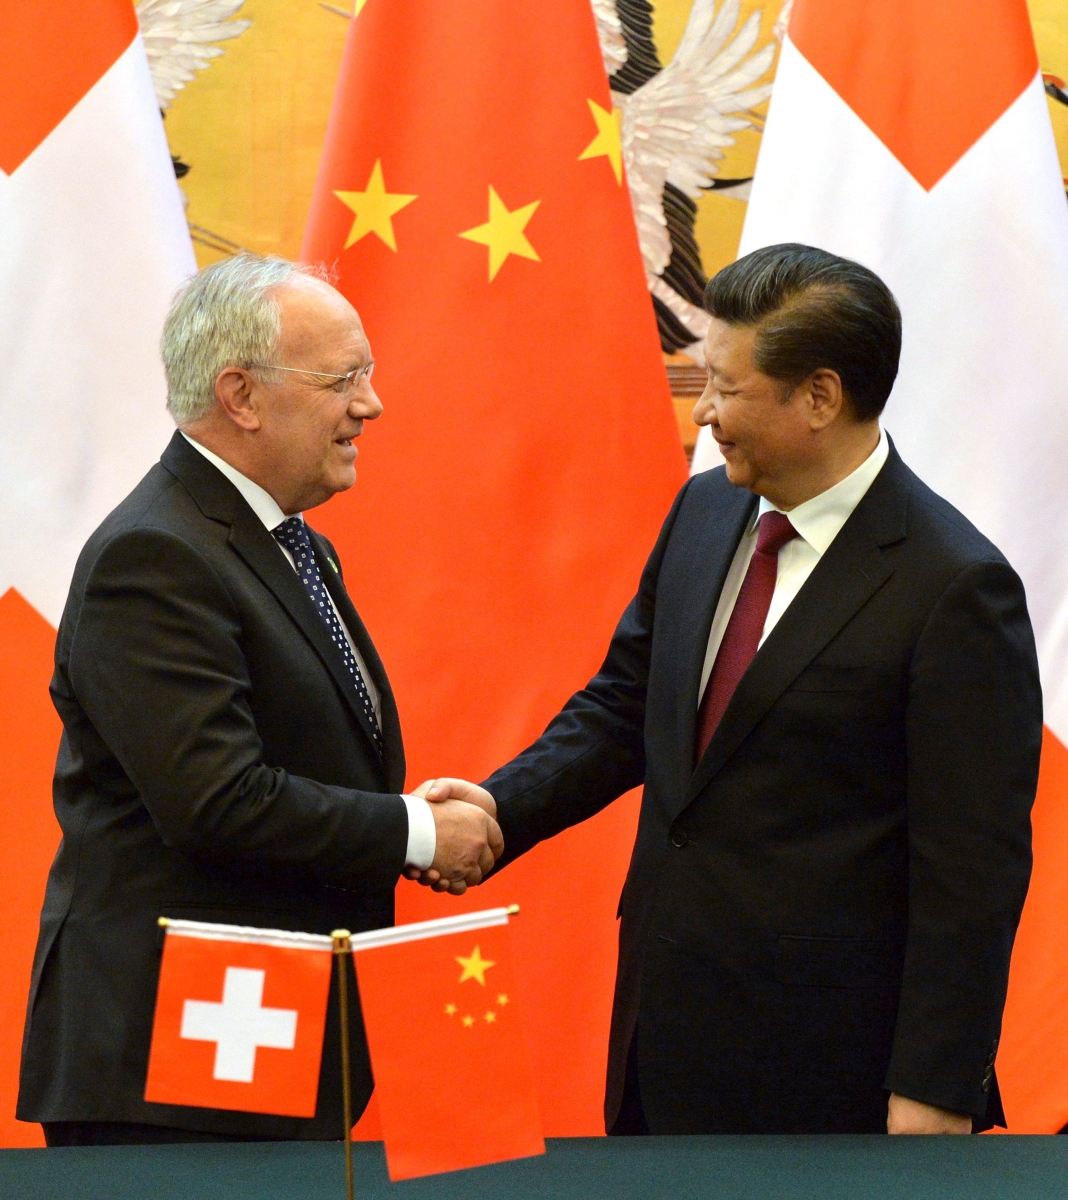 Switzerland's Federal President Johann Schneider-Ammann, left, and Chinese President Xi Jinping shake hands at the end of the signing ceremony at the Great Hall of the People in Beijing Friday, April 8, 2016. (Kenzaburo Fukuhara/Pool Photo via AP) China Switzerland